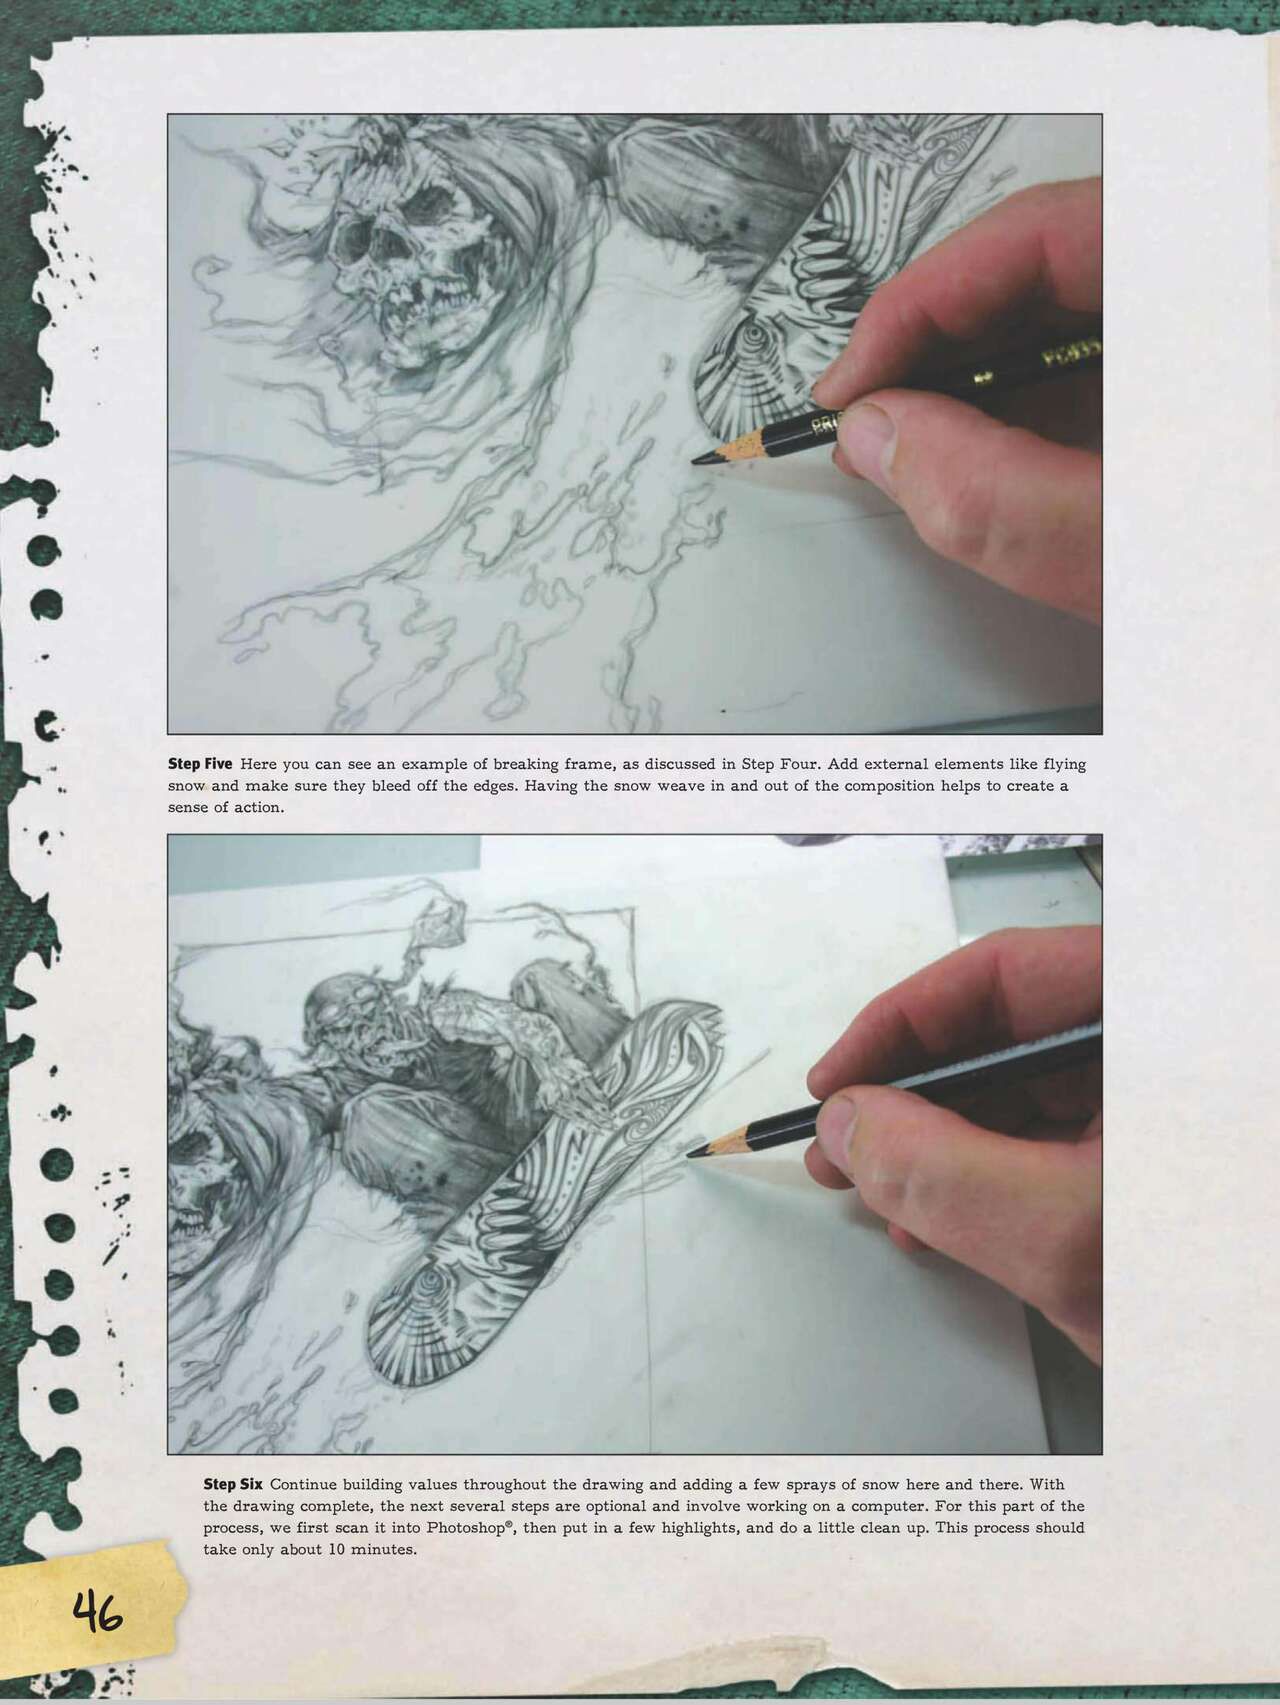 How to Draw Zombies: Discover the secrets to drawing, painting, and illustrating the undead 僵尸描绘集 47